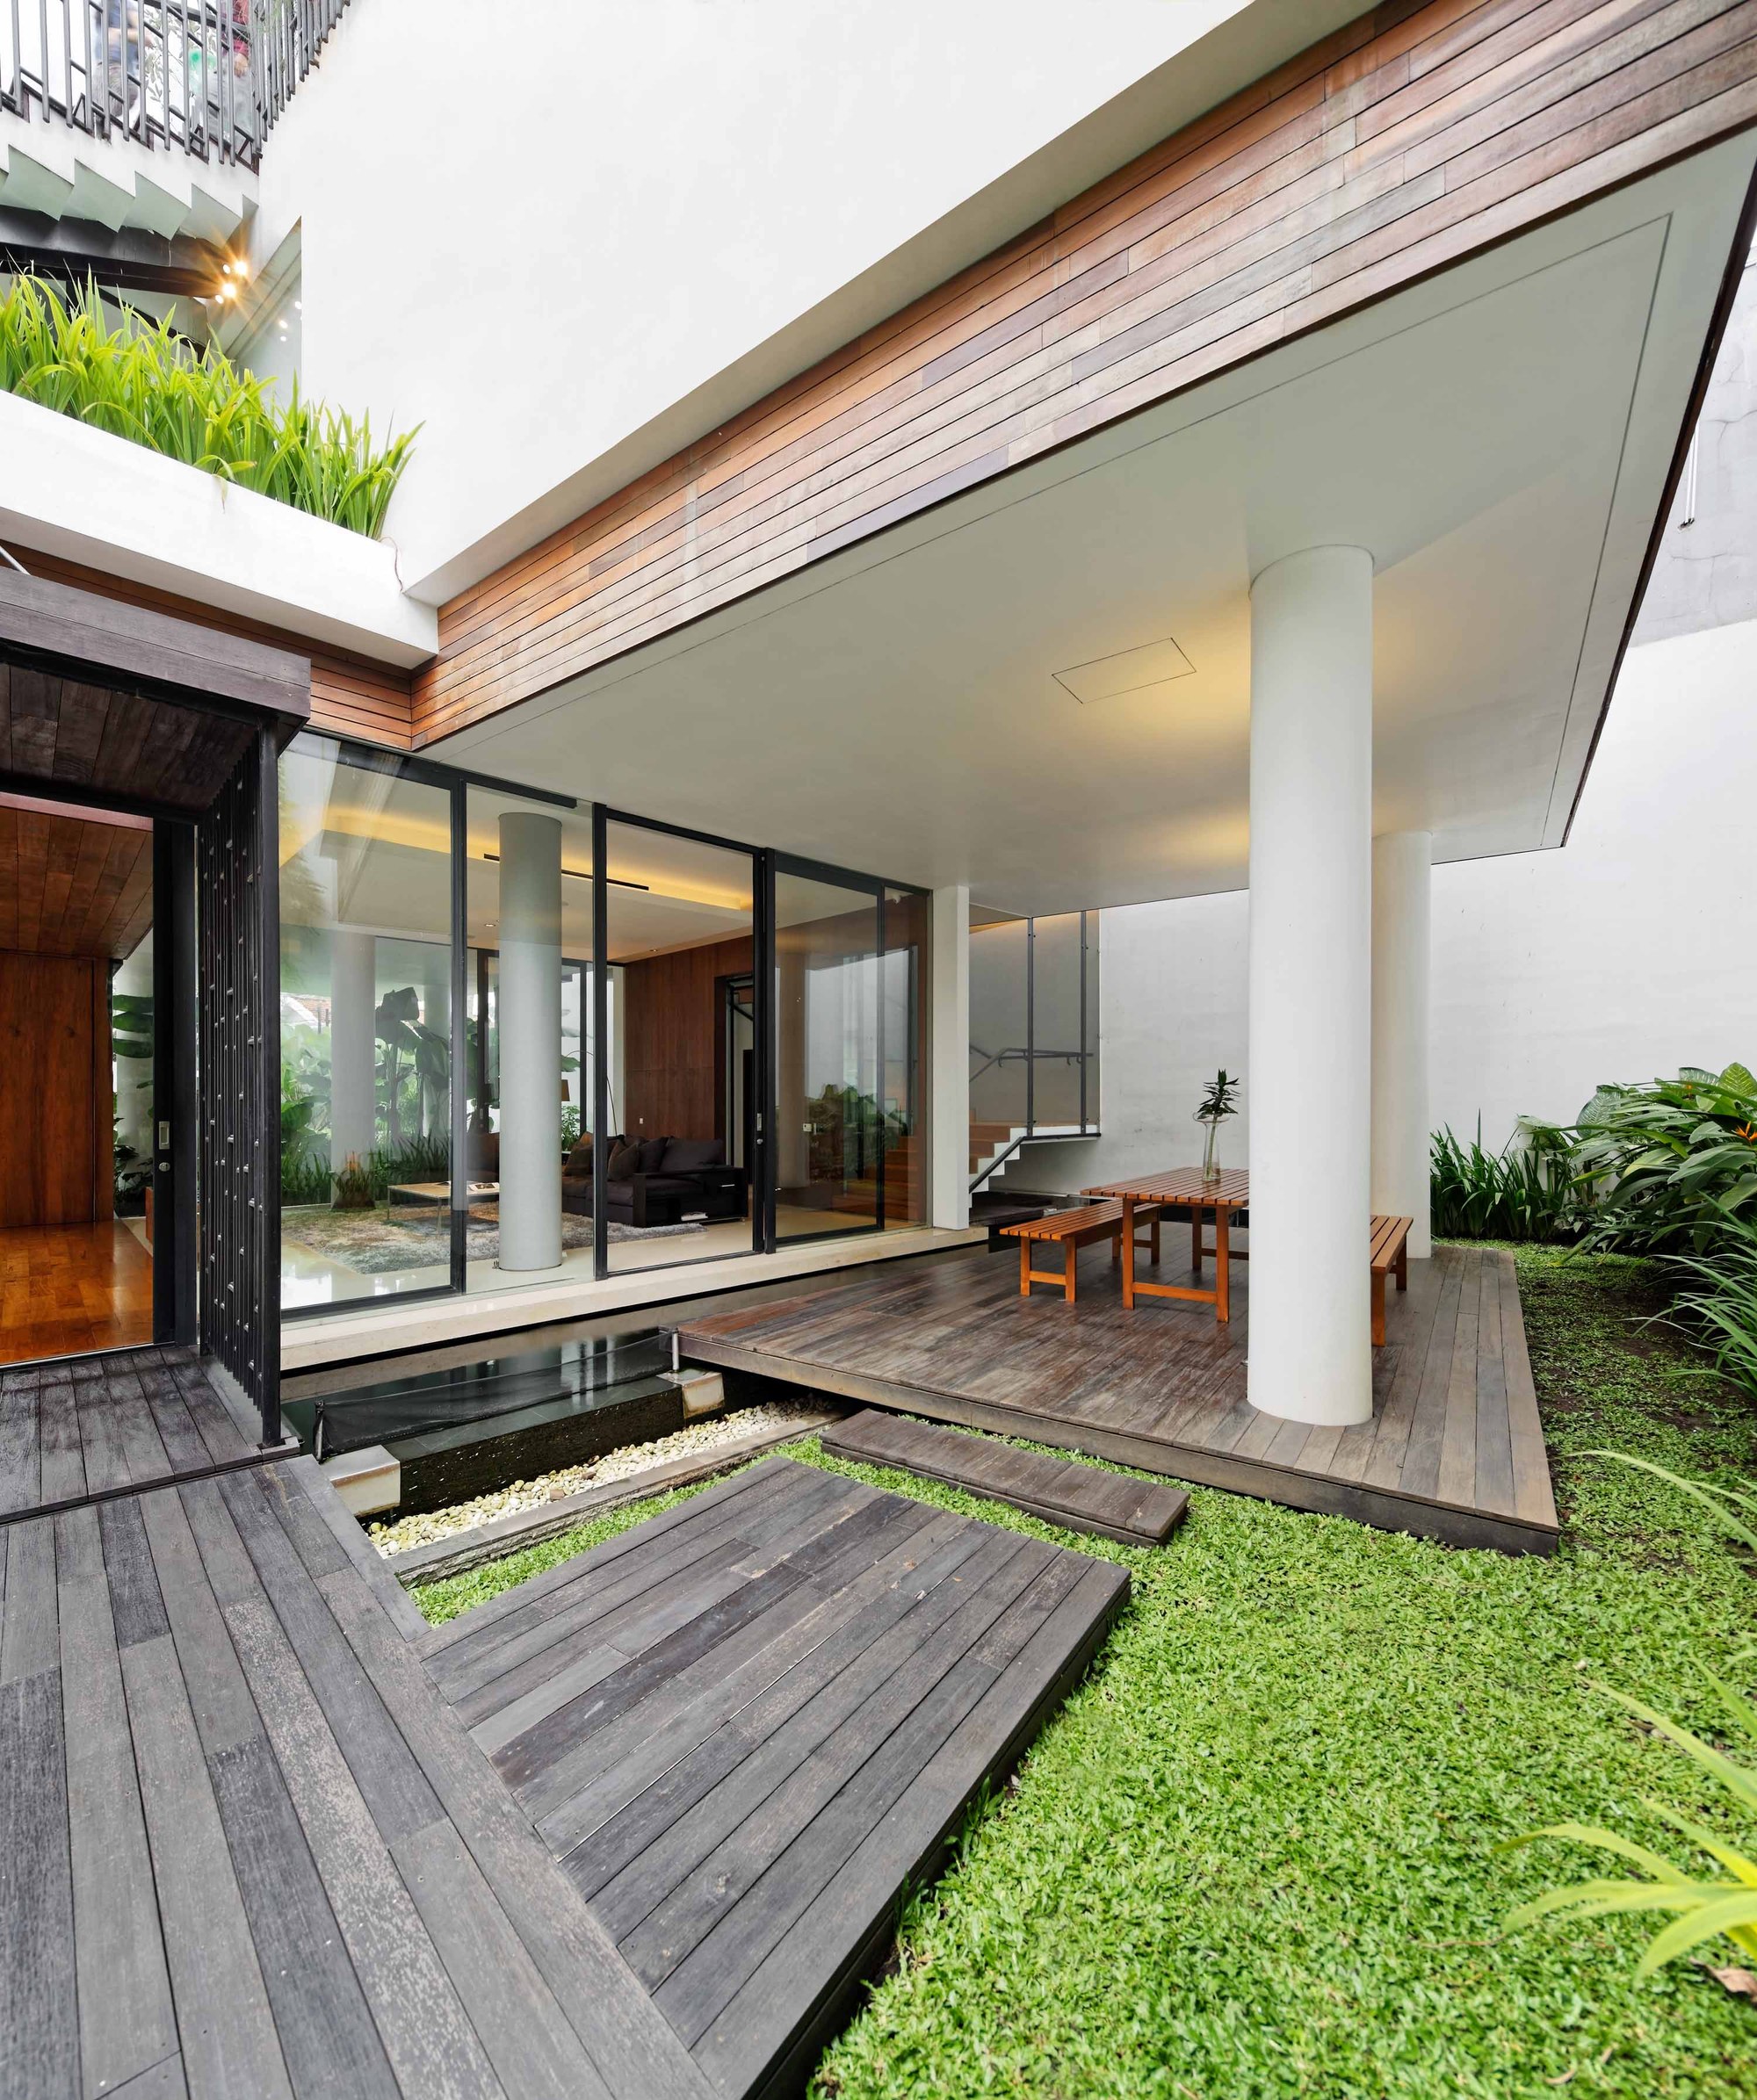 Wooden-decks-and-glass-walls-of-the-Long-House